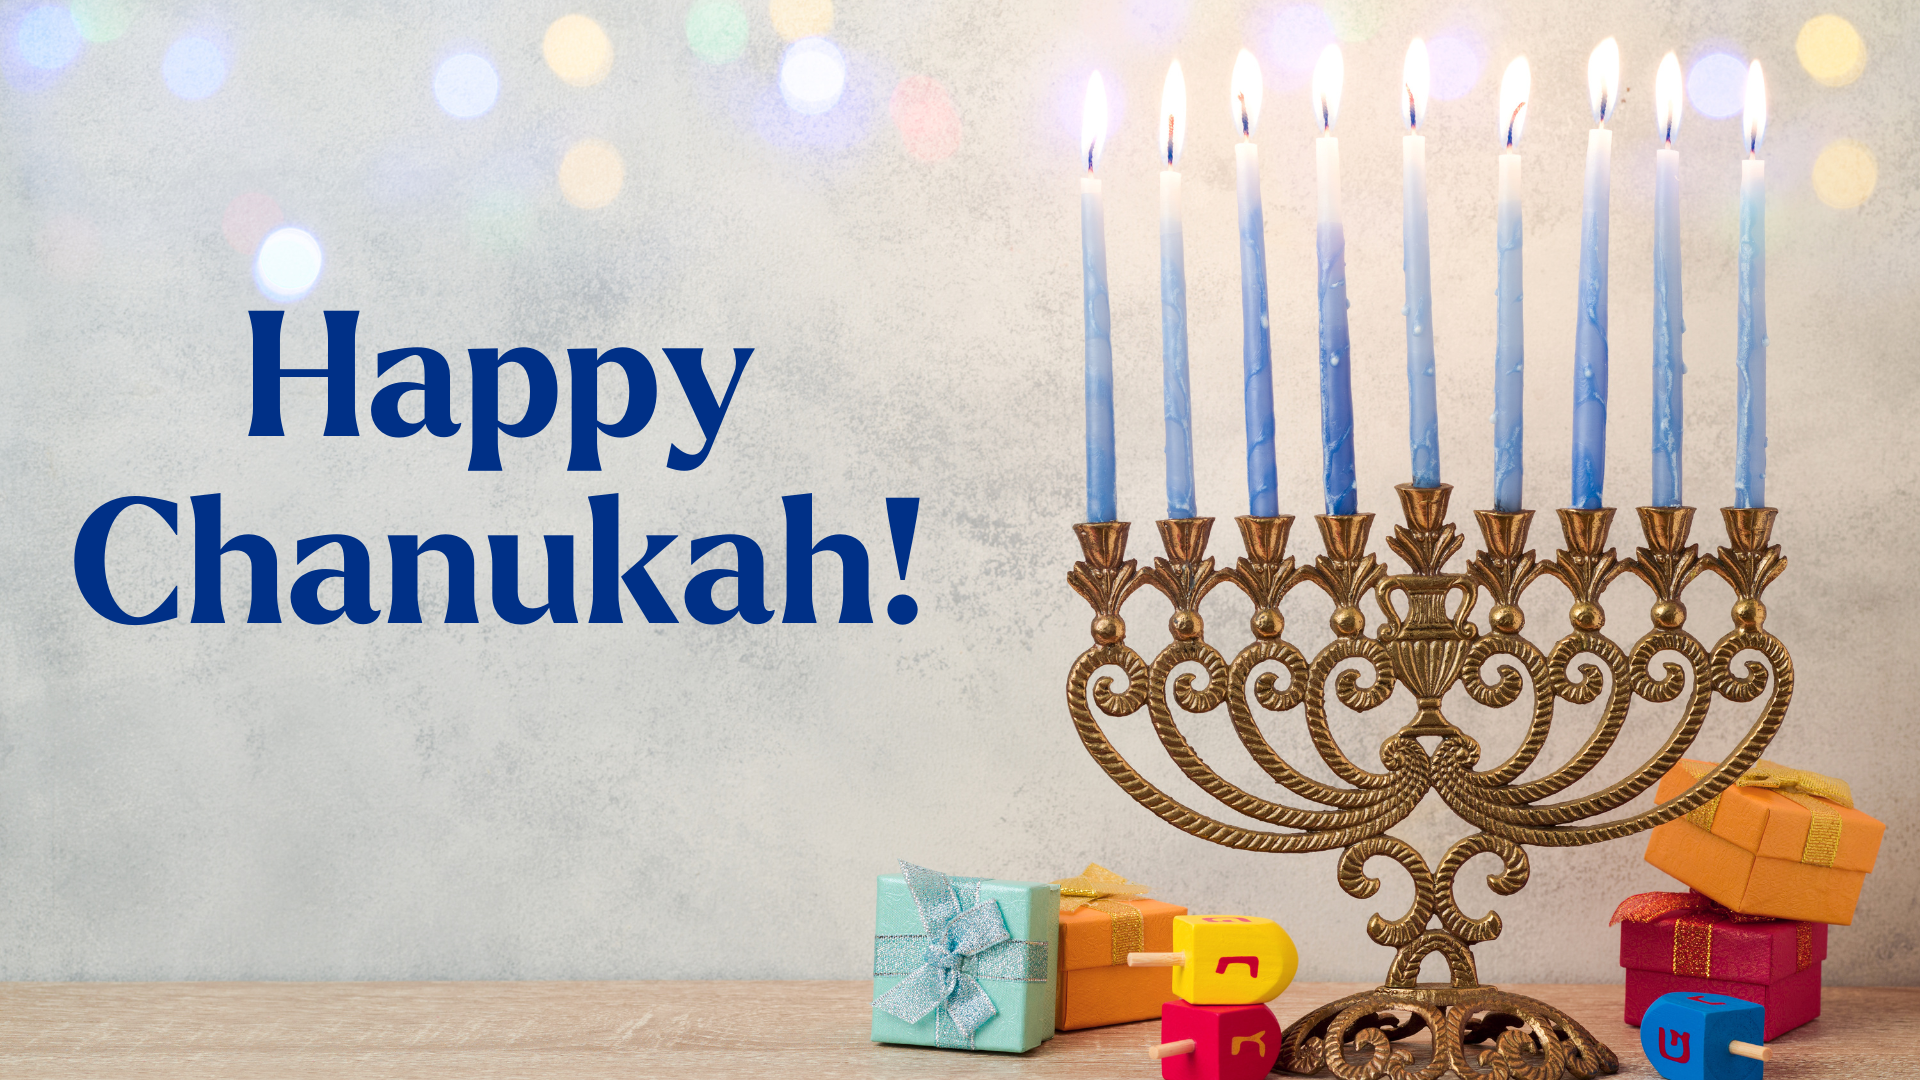 A graphic featuring a lit menorah, dreidels and Chanukah gelt. On the left, the text reads 